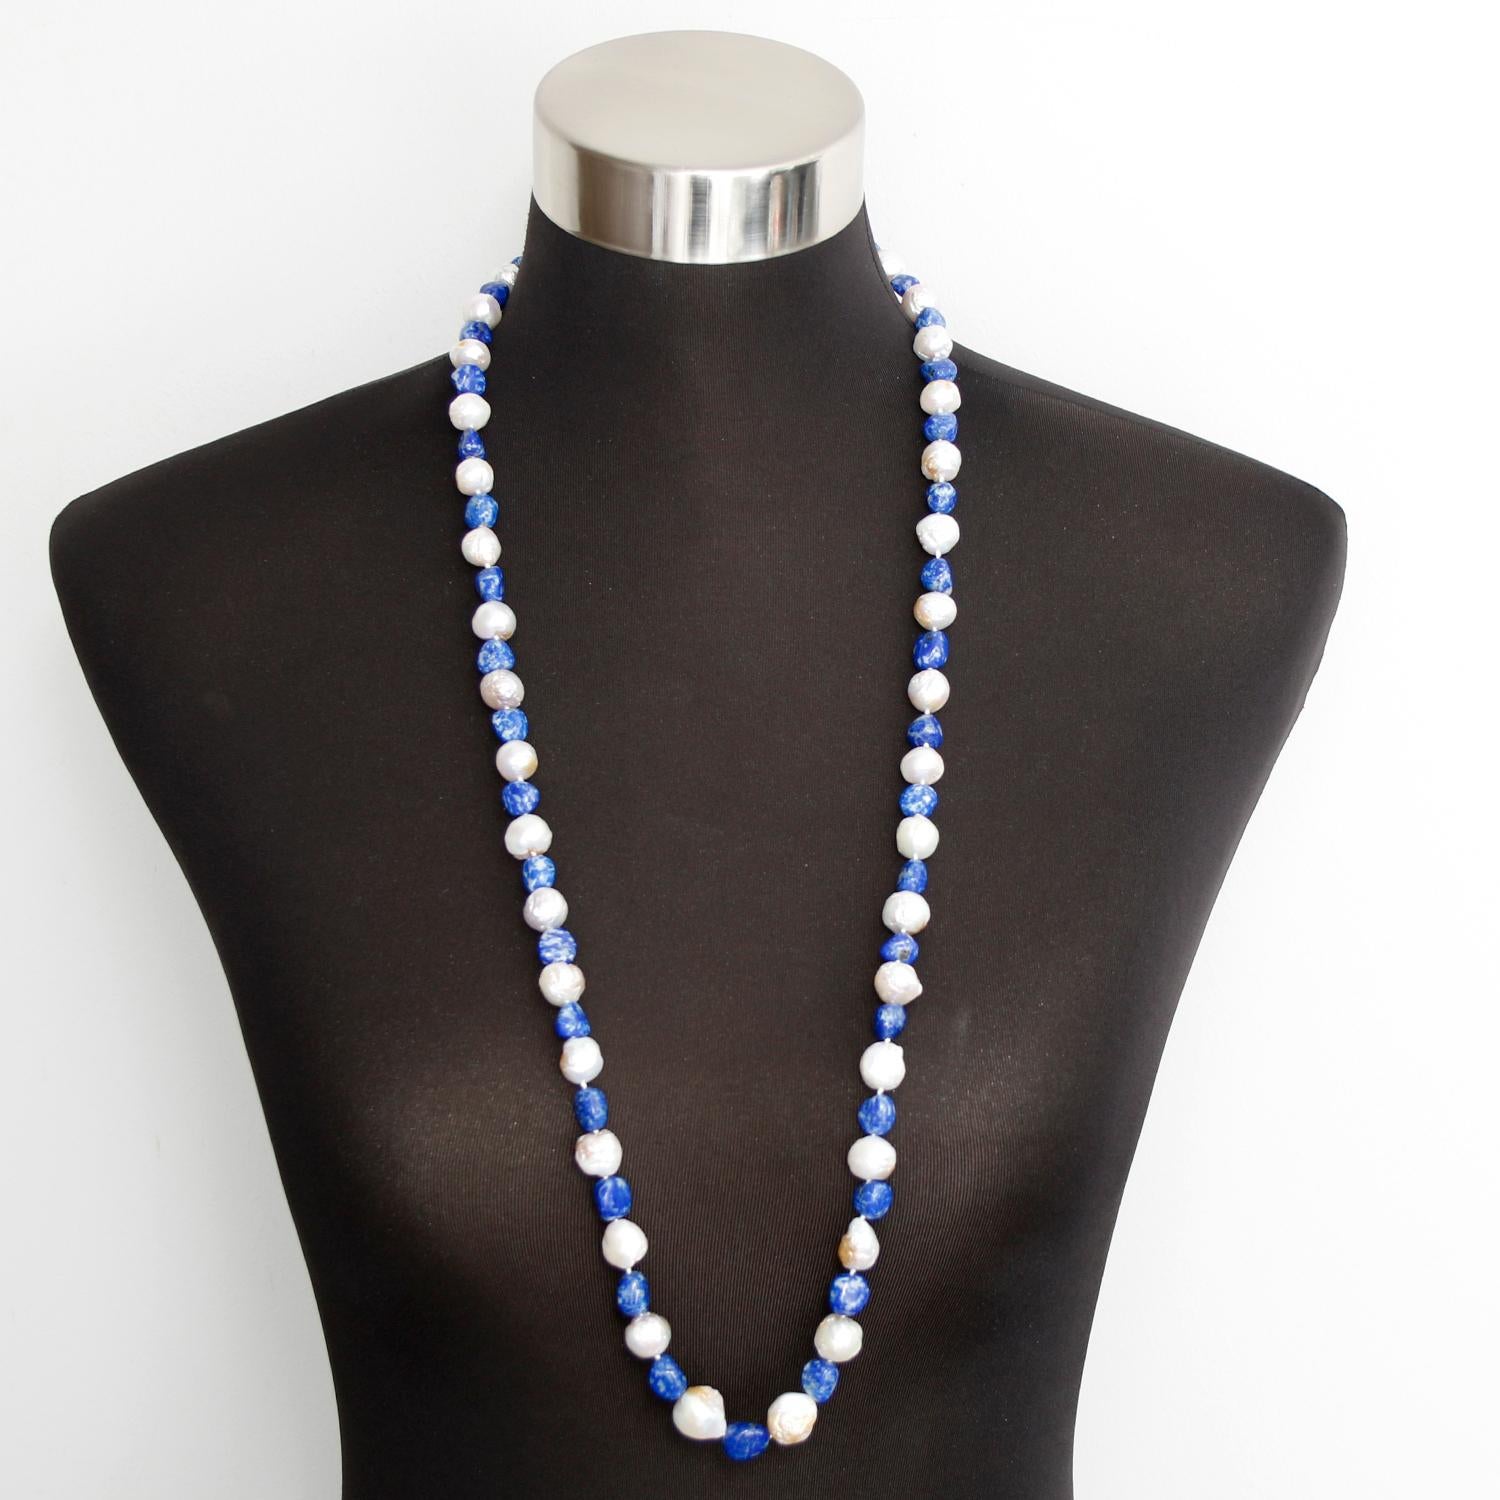 Baroque Pearl and Lapis Lazuli Necklace - 8-11 mm baroque pearls alternating with Lapis Lazuli beads. Strung in a 36 inch necklace. Wear with denim, or for a glam dress, this necklace is universally flattering and versatile. Fastened with a Sterling